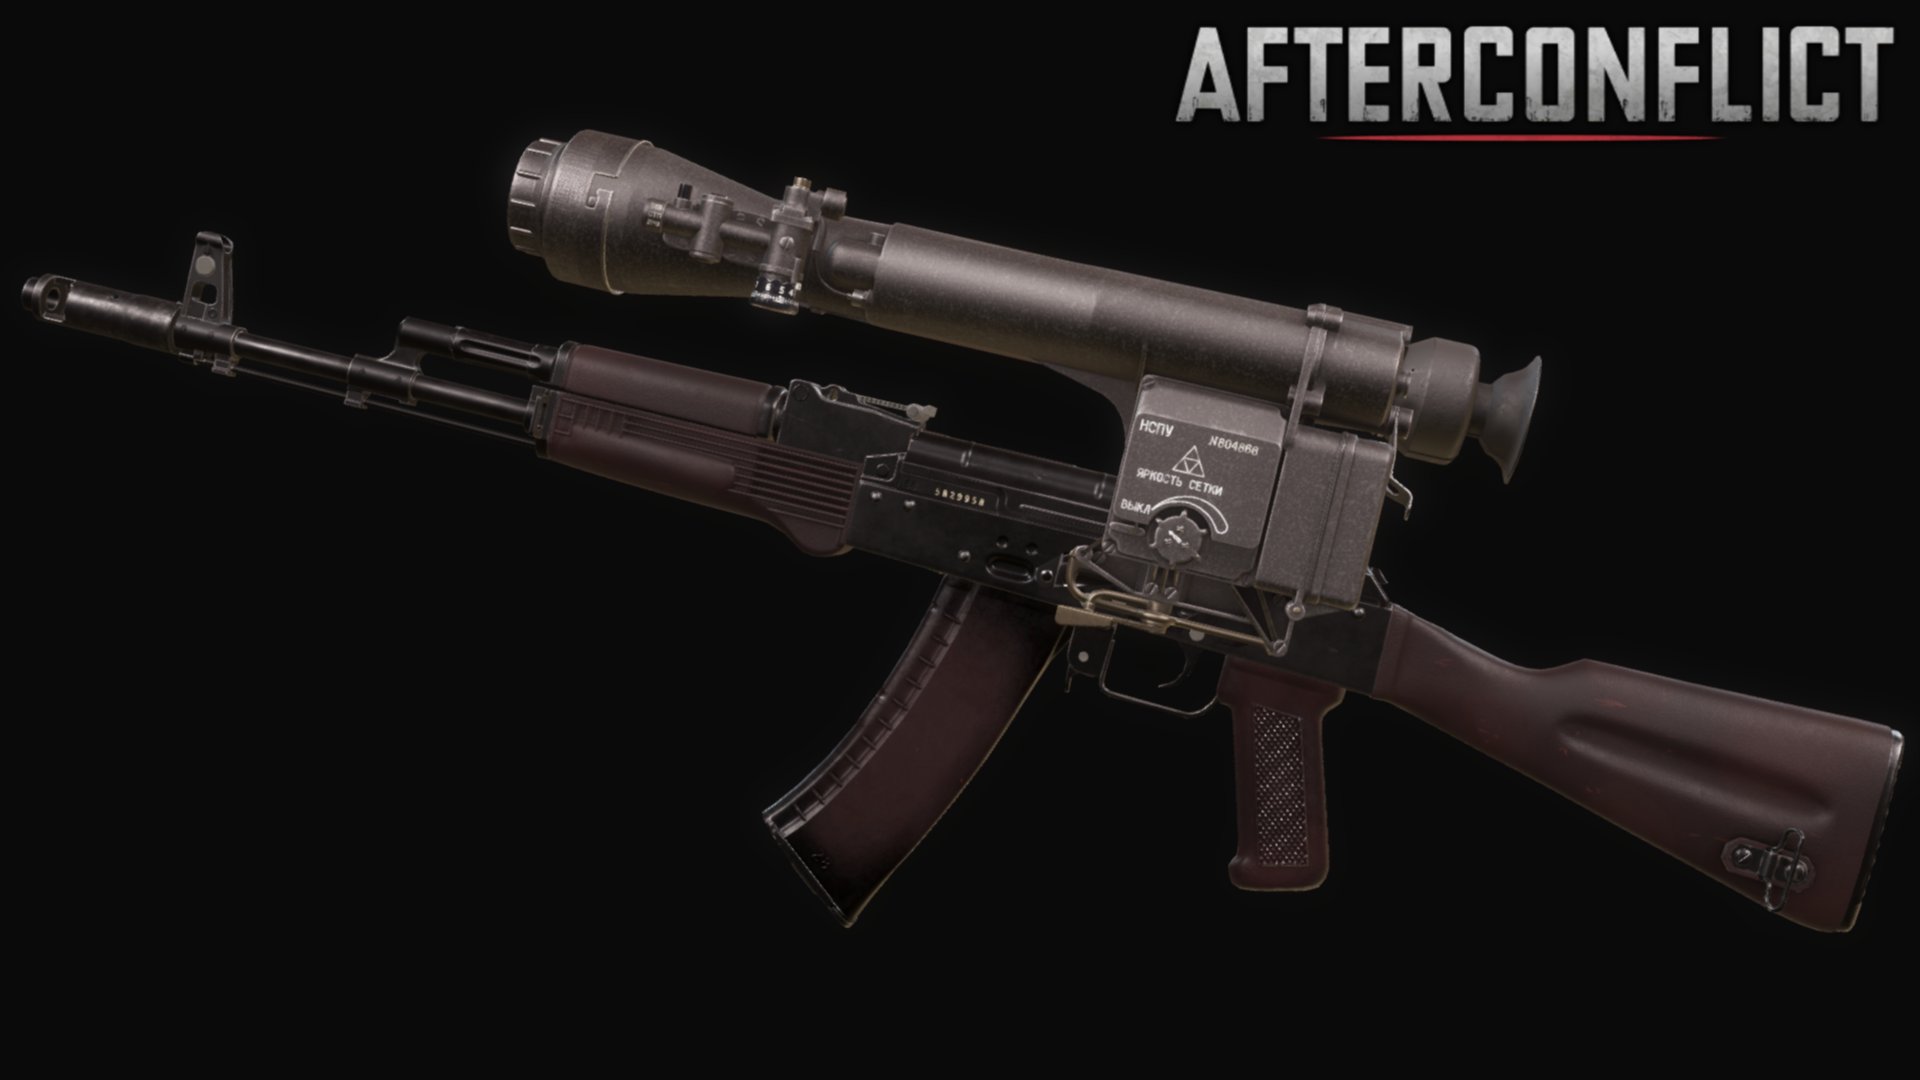 Afterconflict Out Of The Darkness A Scope Emerges Following On From Our Previous Preview Post Here S Our Fully Textured In Game Model Of The Nspu Scope If You Haven T Already Be Sure